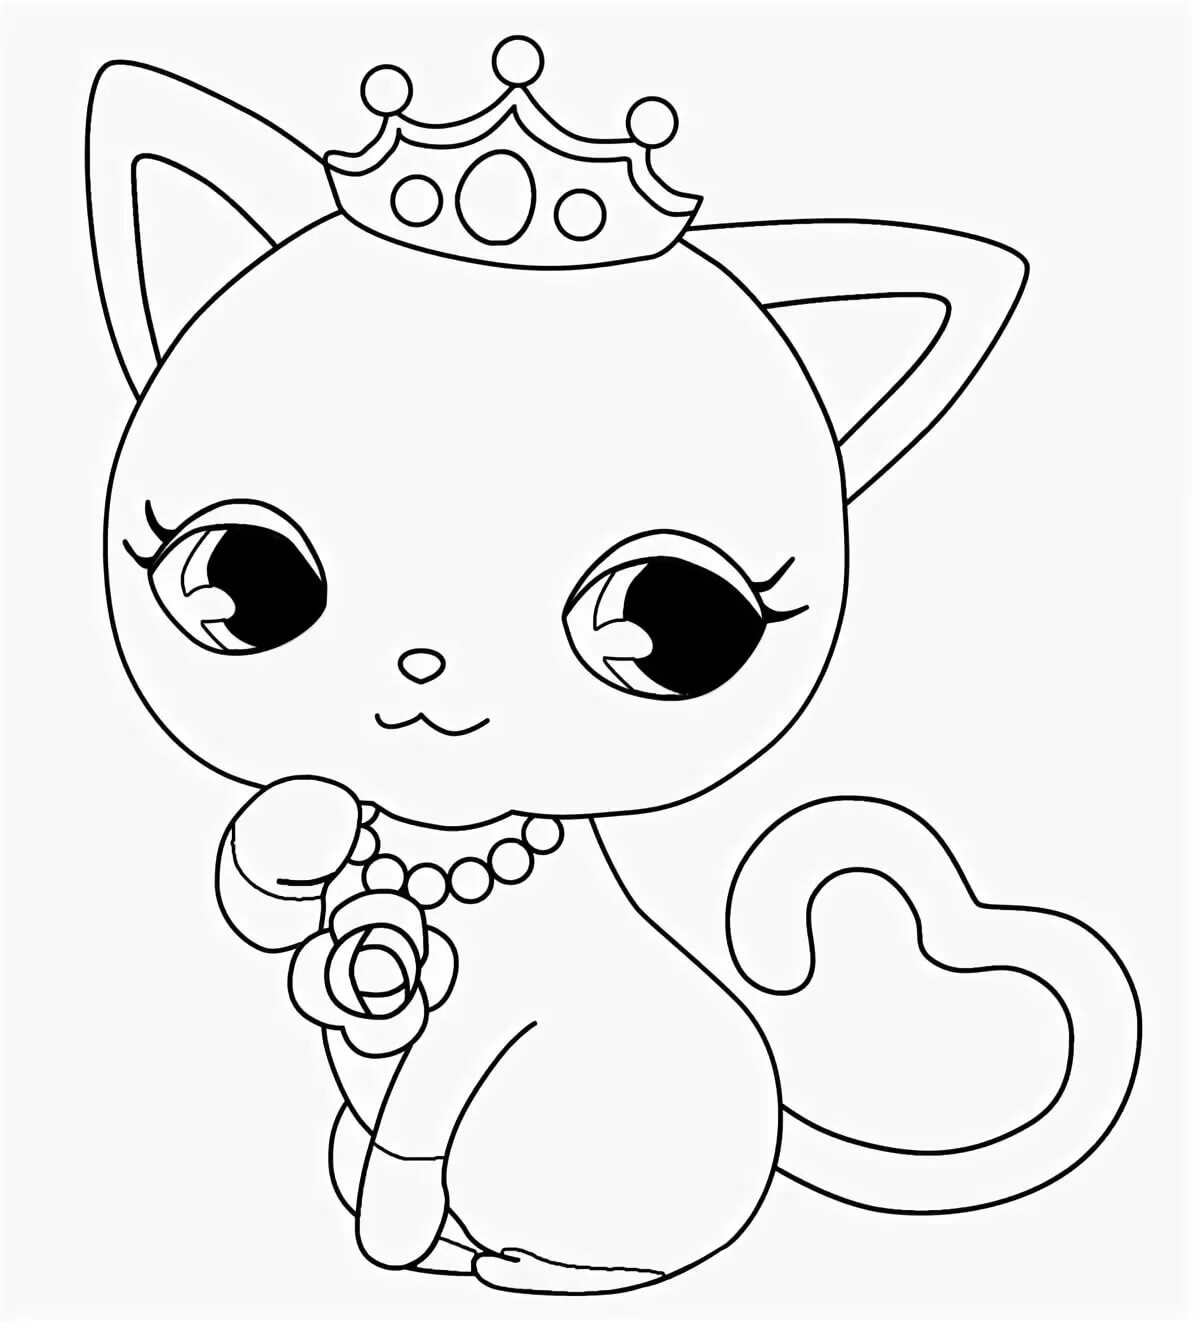 Exciting coloring book for 12 year old girls with cute cats